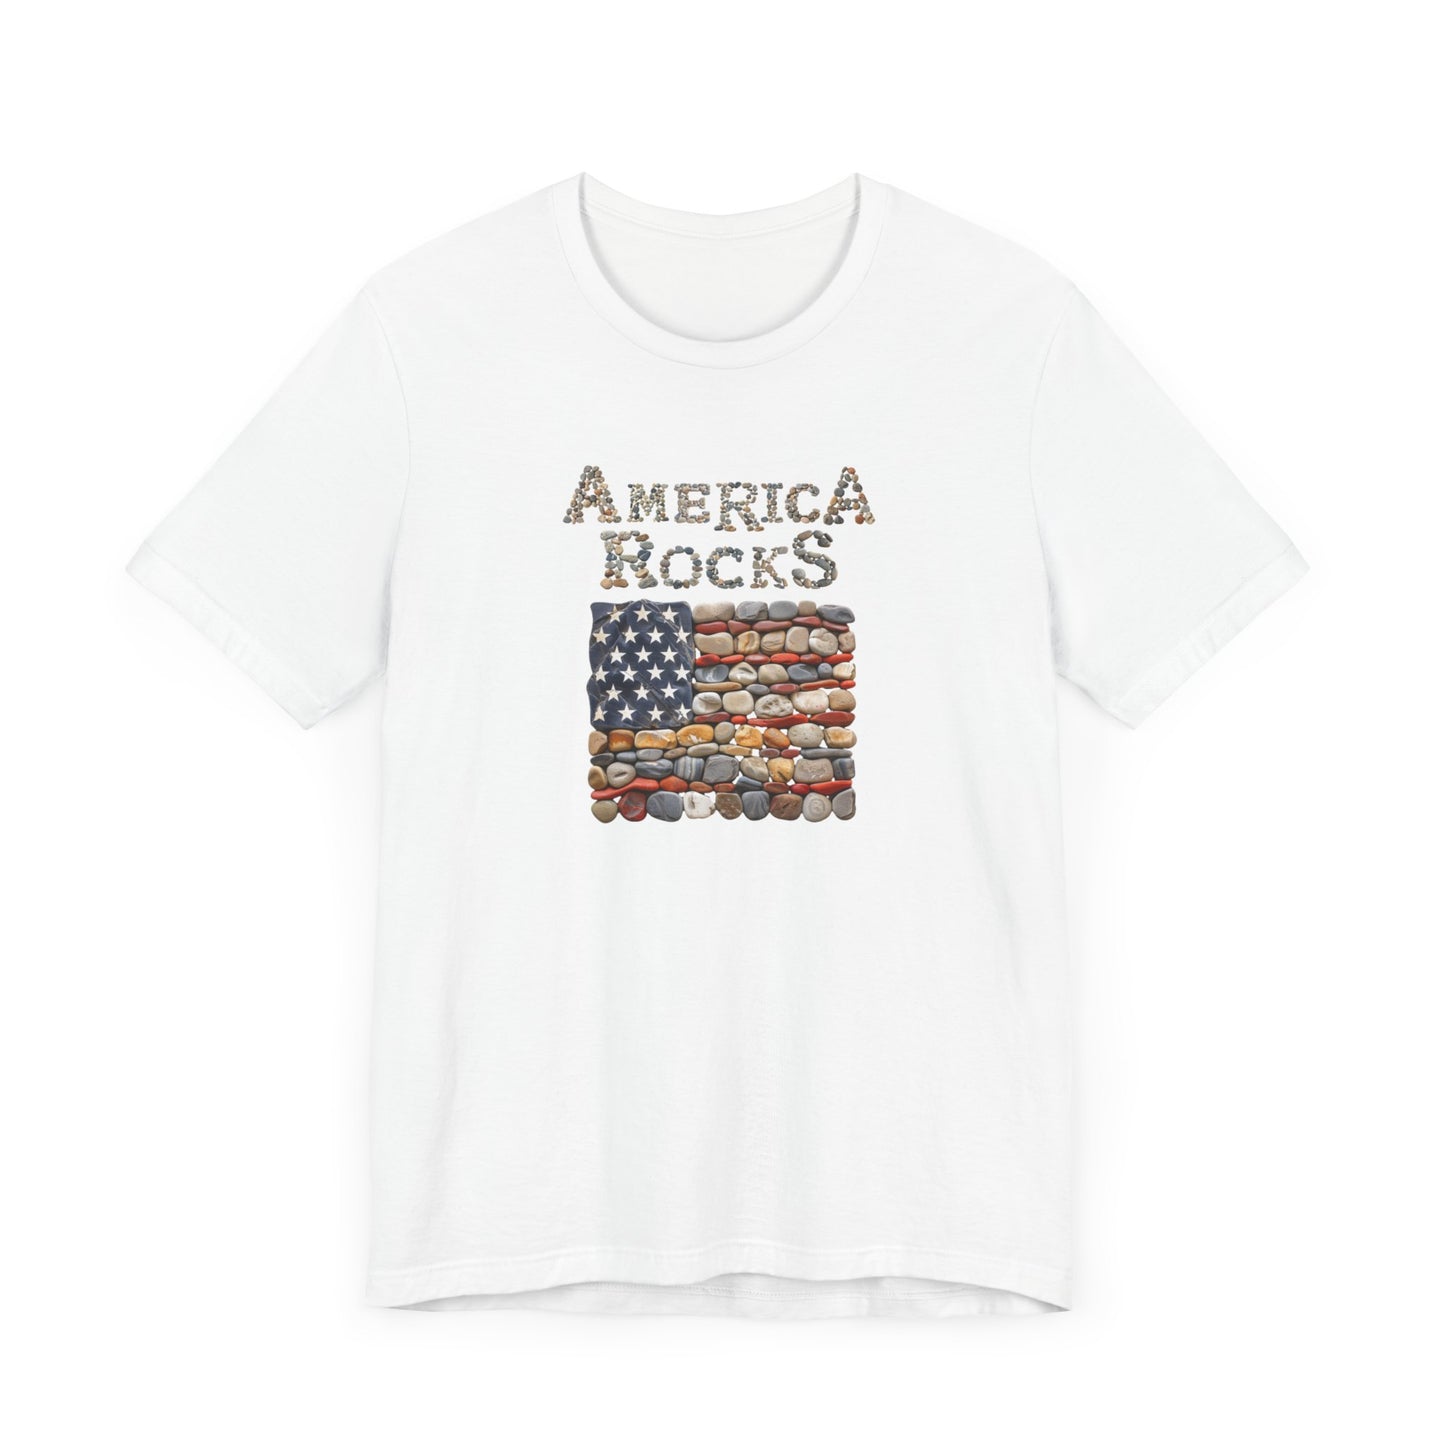 America Rocks T-Shirt, Cotton Blend Crew Neck Tee, White, Black or Navy, Featuring American Flag Design